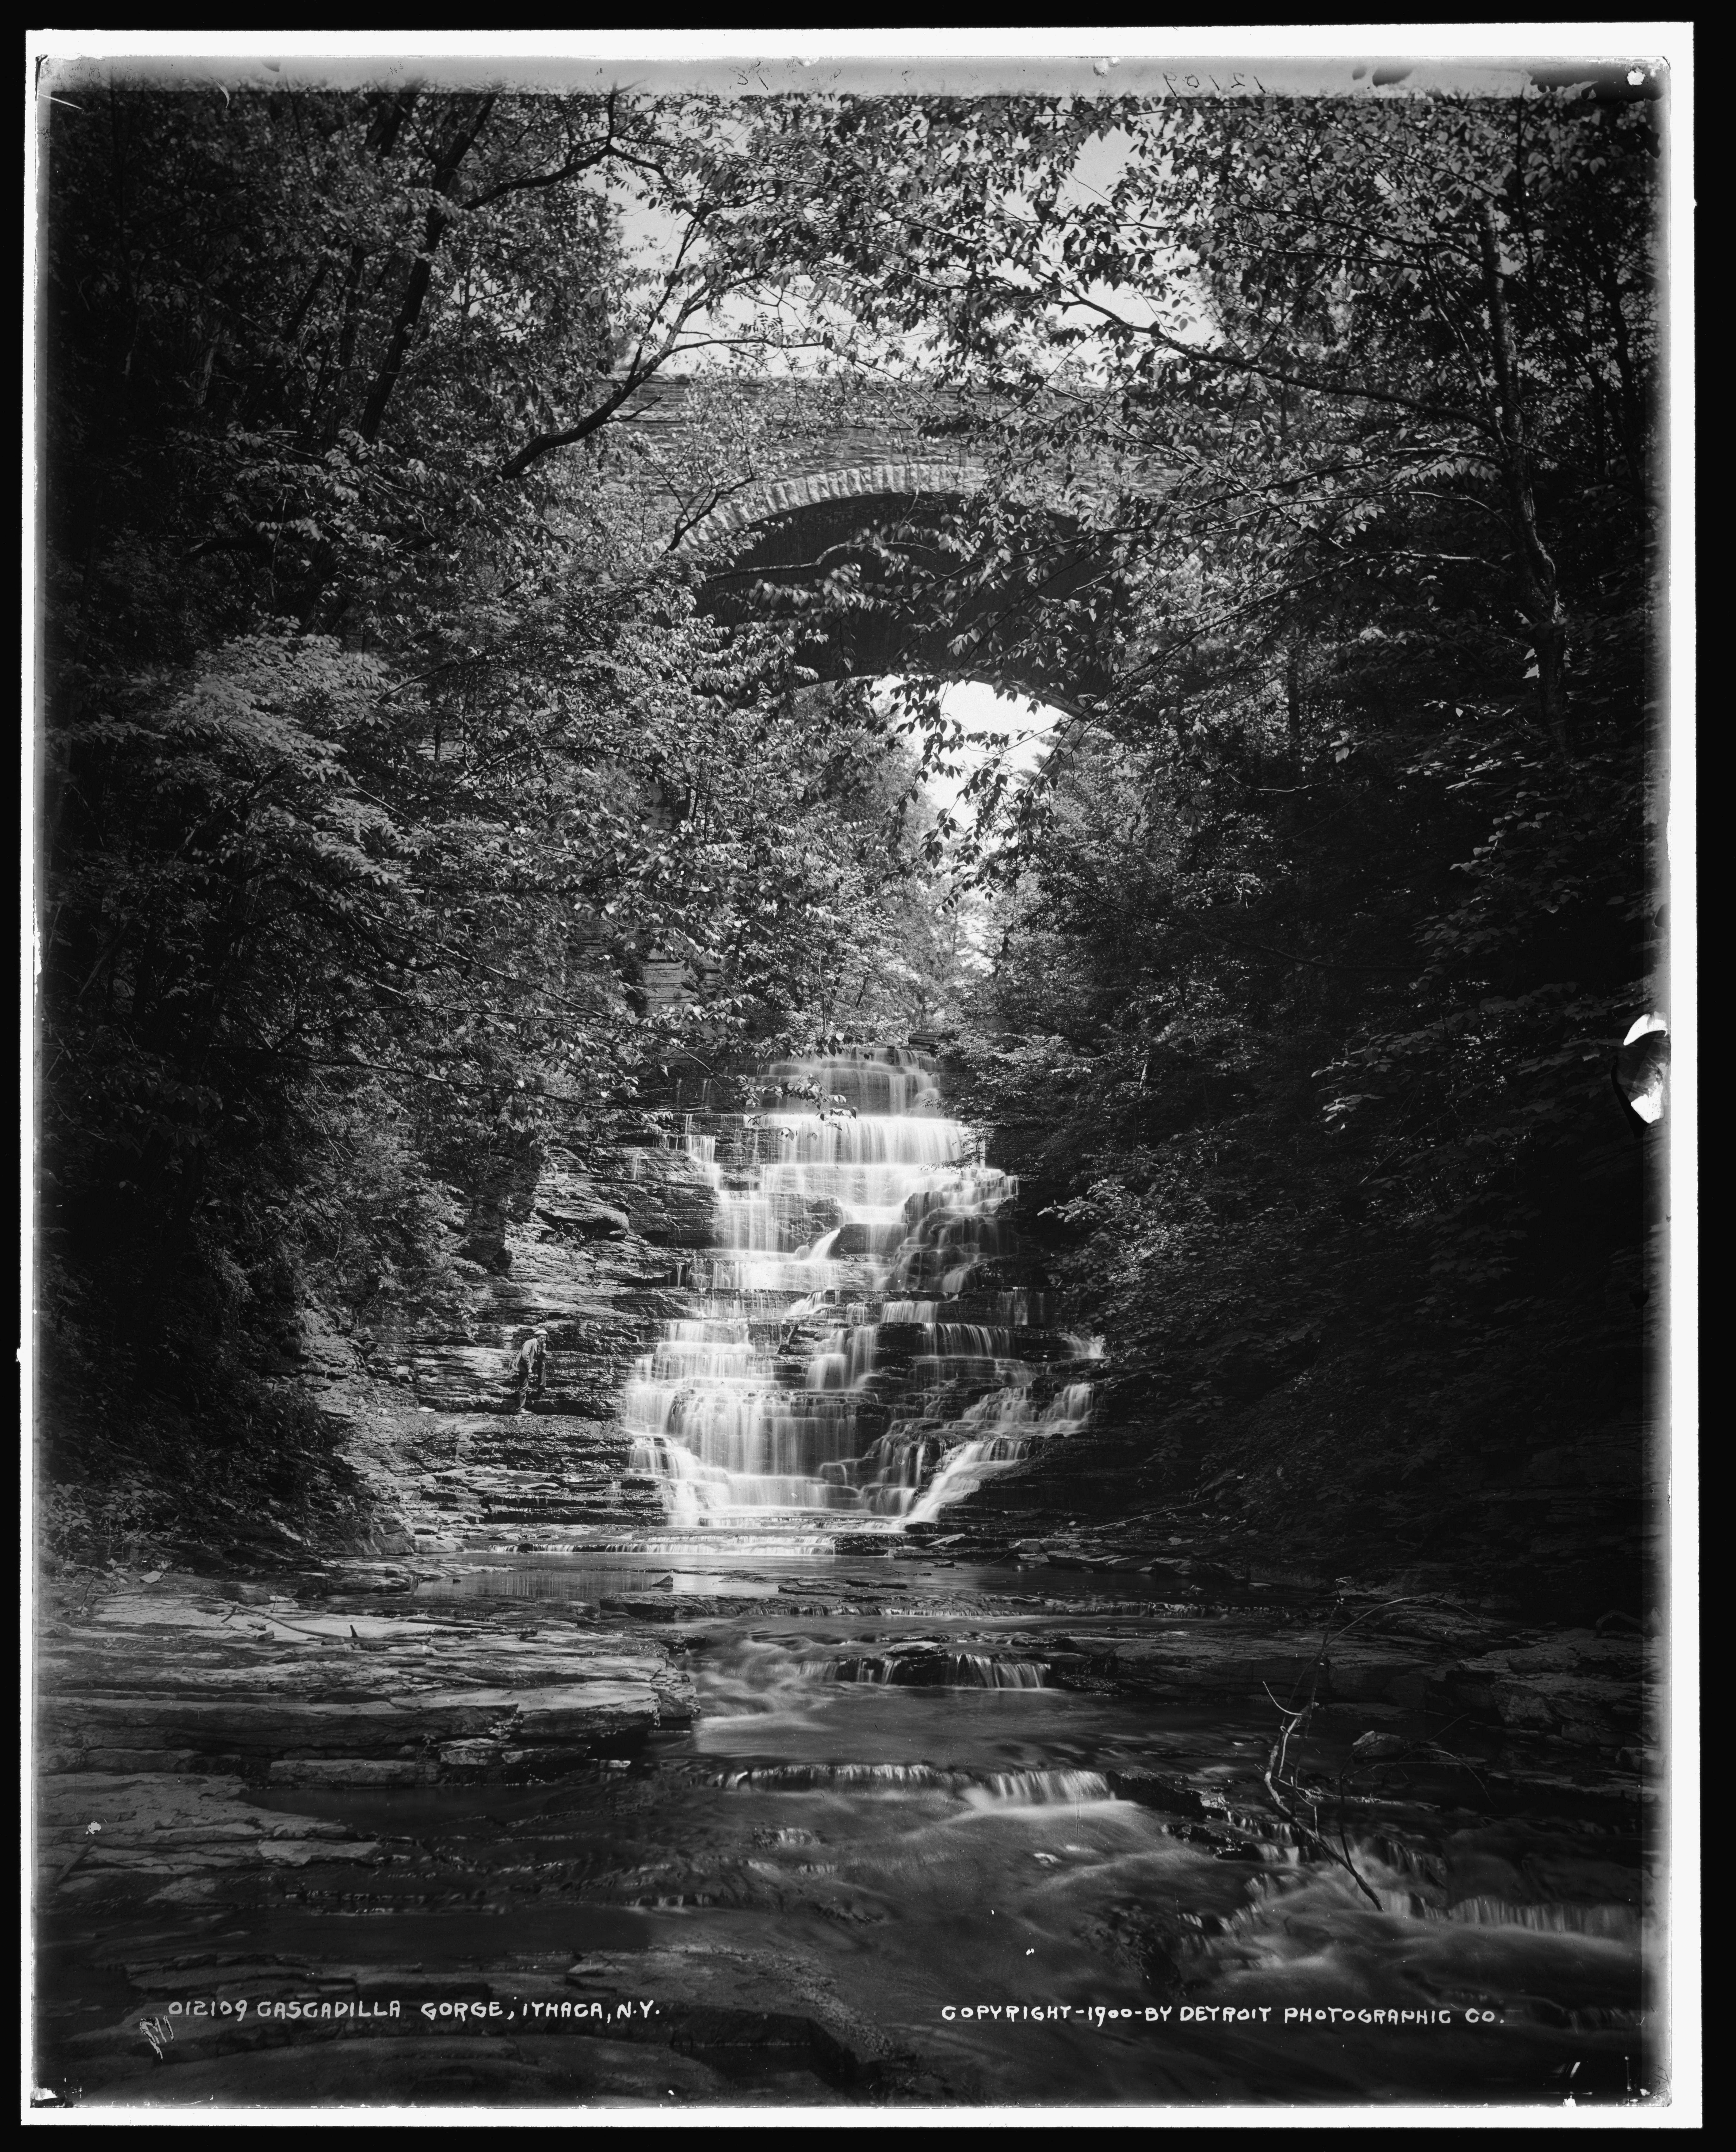 Black and white photograph of Cascadilla Gorge in Ithaca, N.Y.